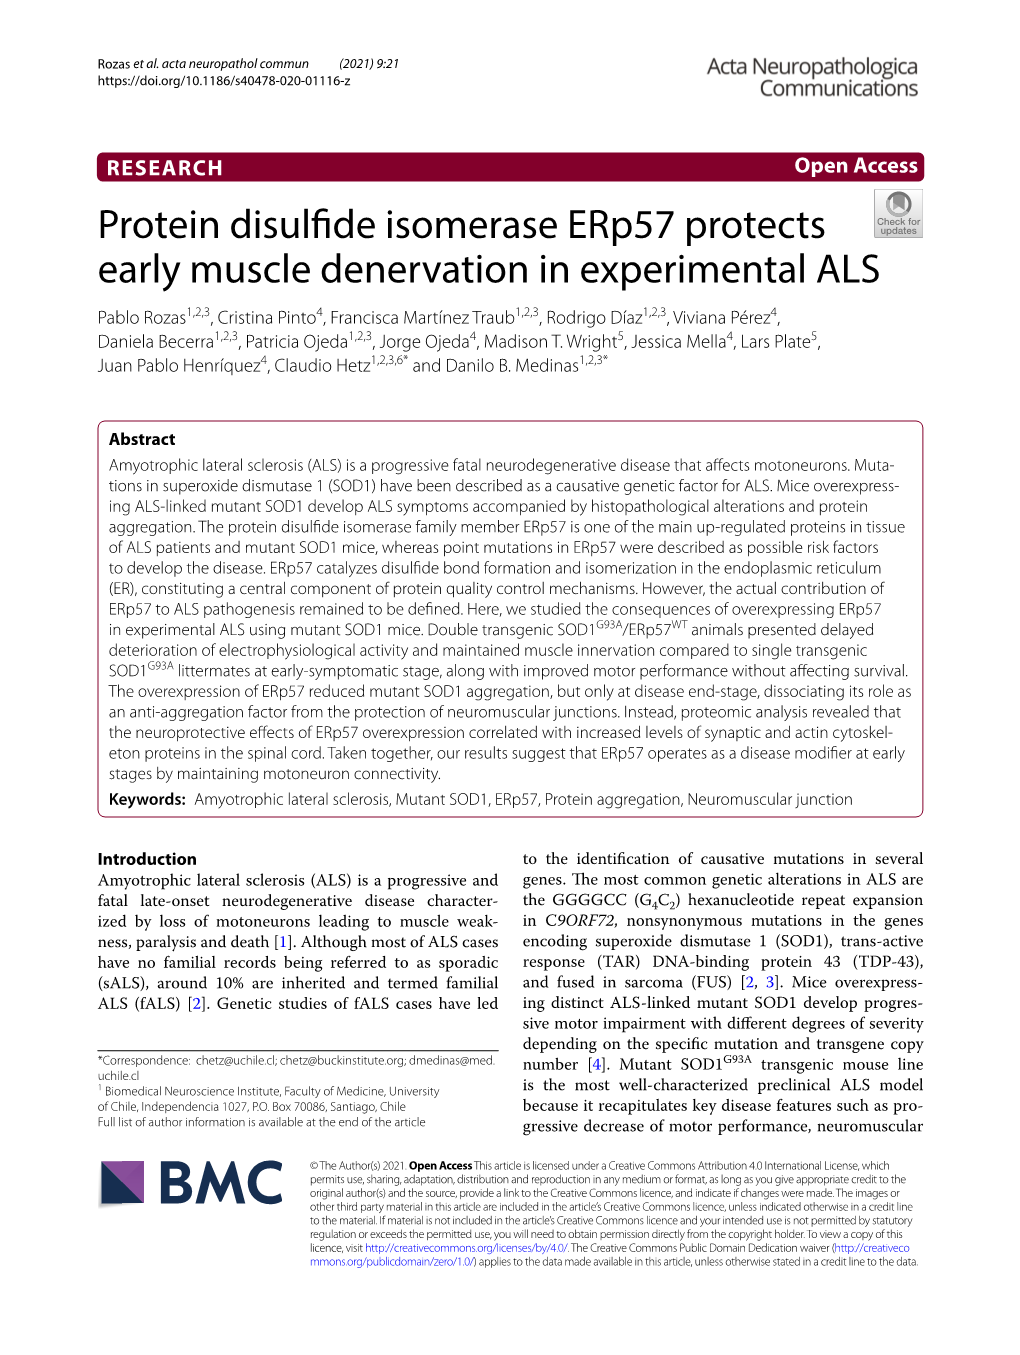 Protein Disulfide Isomerase Erp57 Protects Early Muscle Denervation